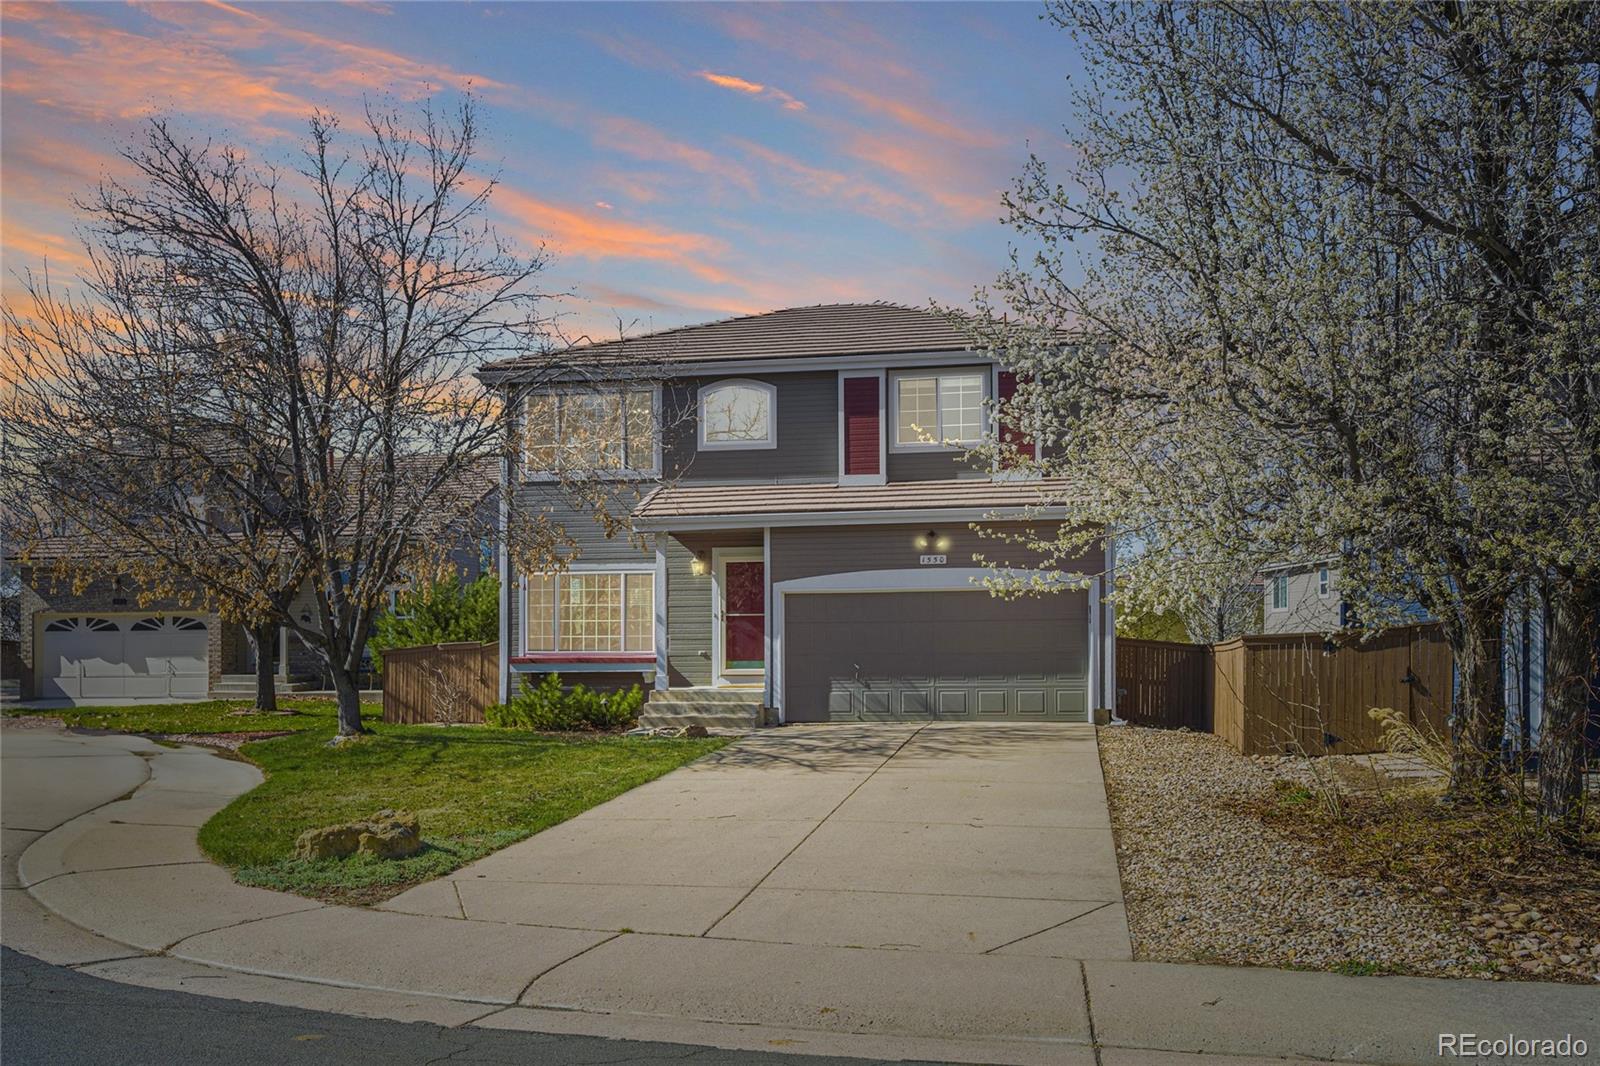 1550  Mountain Maple Avenue, highlands ranch MLS: 1542681 Beds: 3 Baths: 3 Price: $660,000